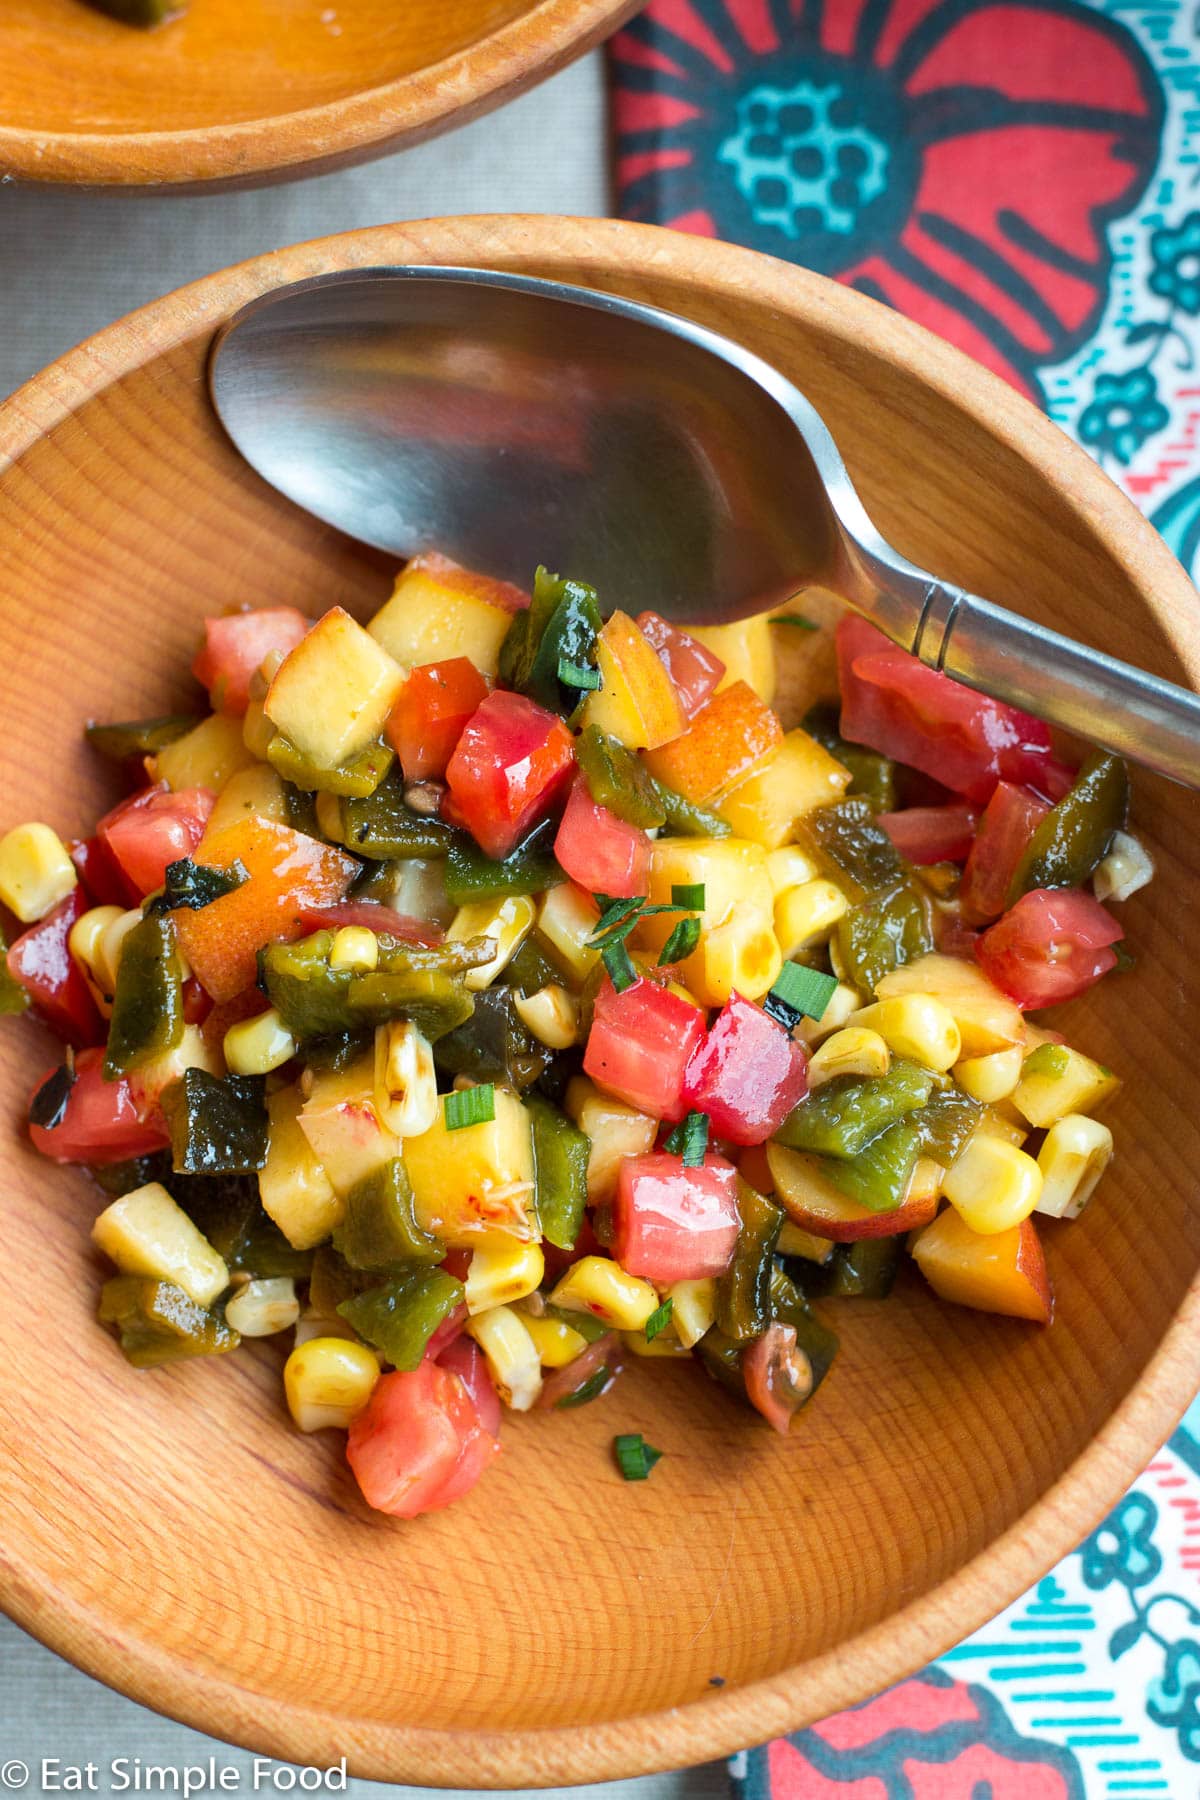 Wood bowl of chunks of peaches, tomato, and corn salsa. Spoons on the side. Top view.